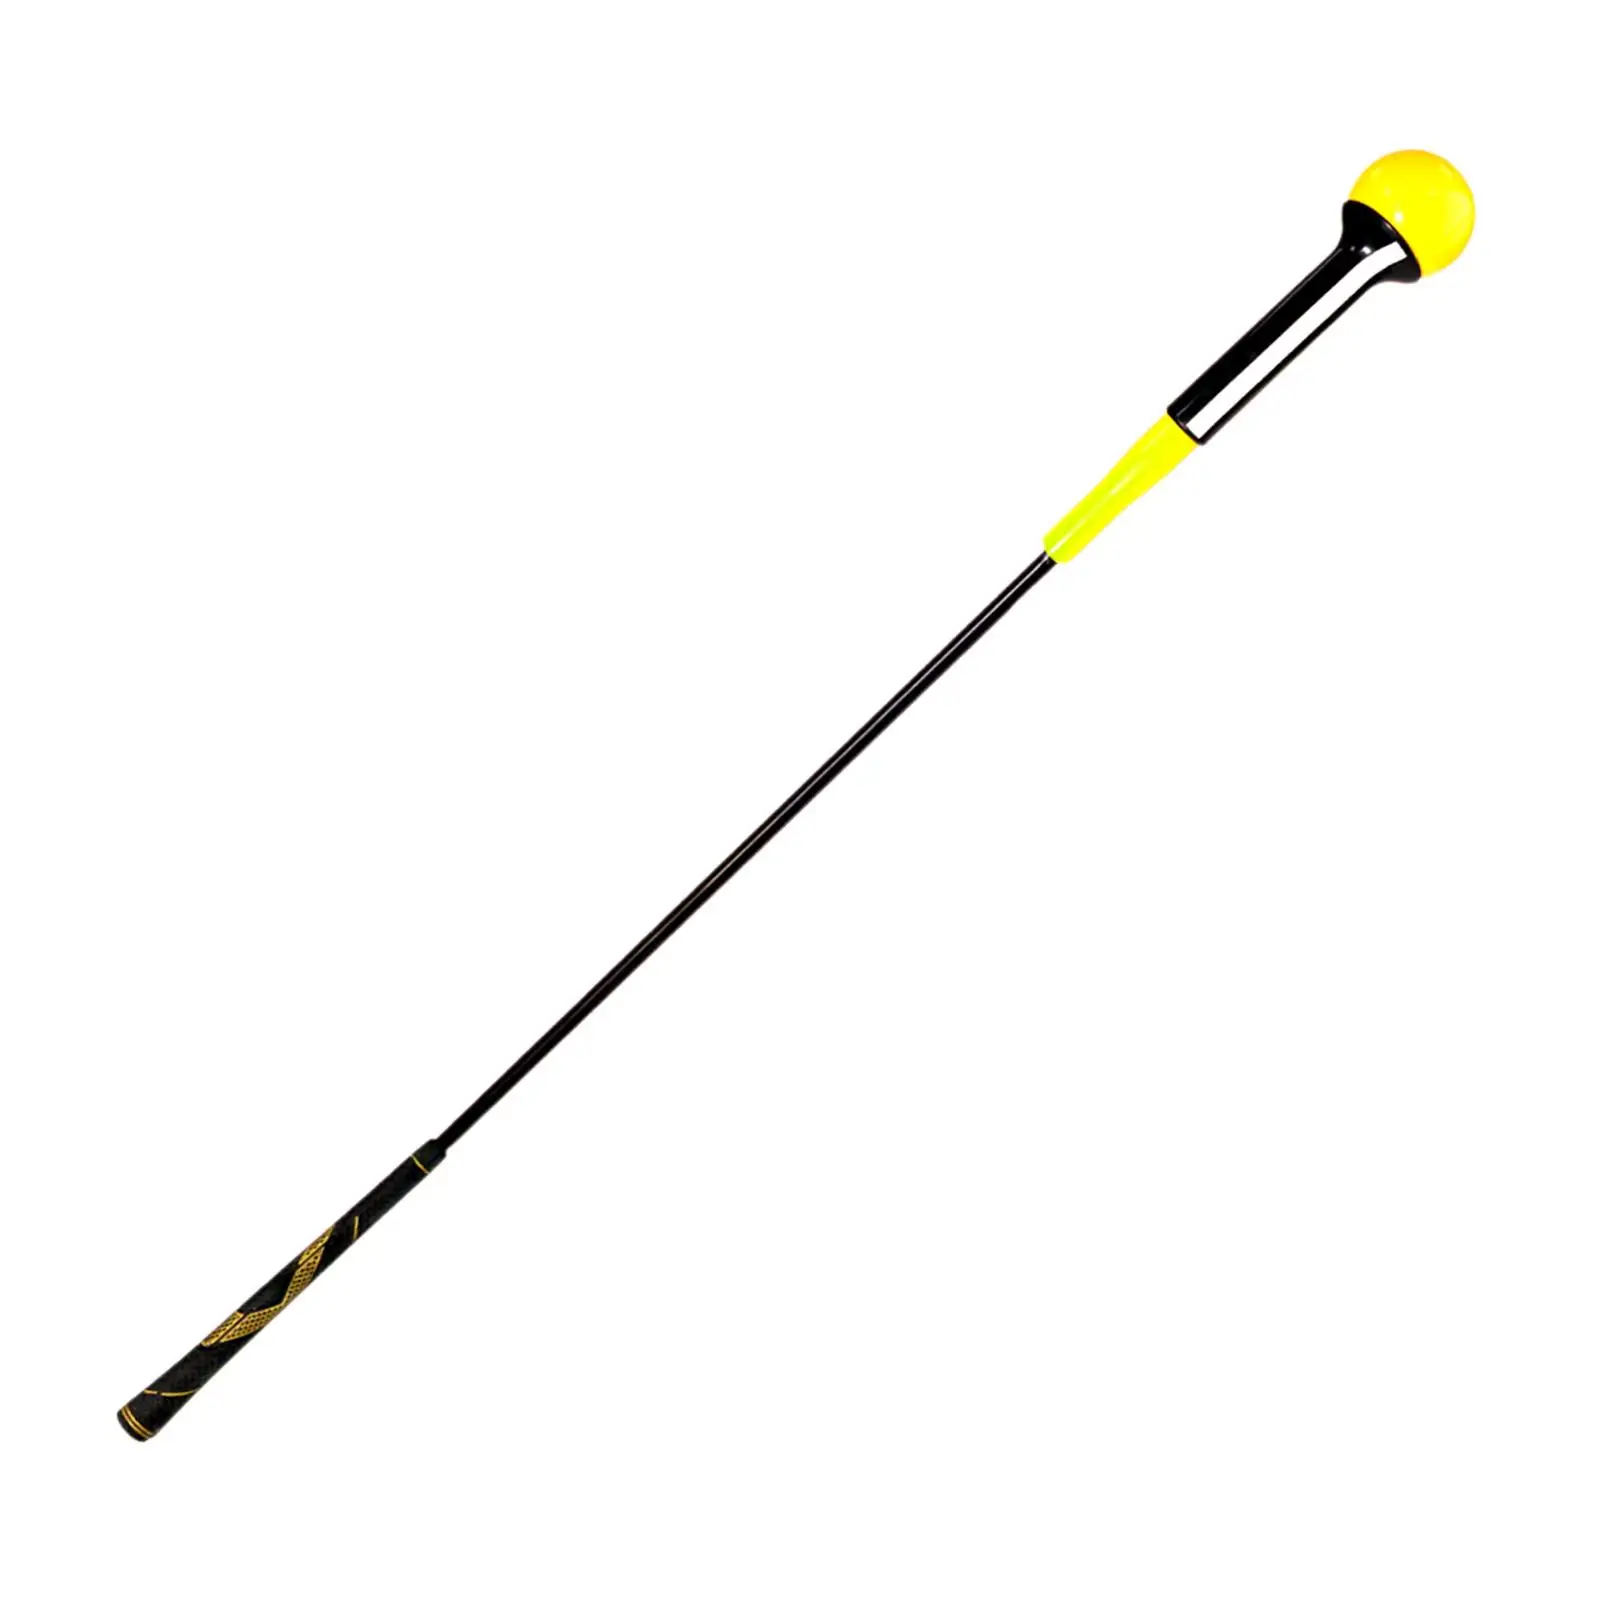 Lightweight Warm up Stick Practice Position Correction Golf Trainer Golf Accessories Golf Swing Trainer Aid for Rhythm Adult